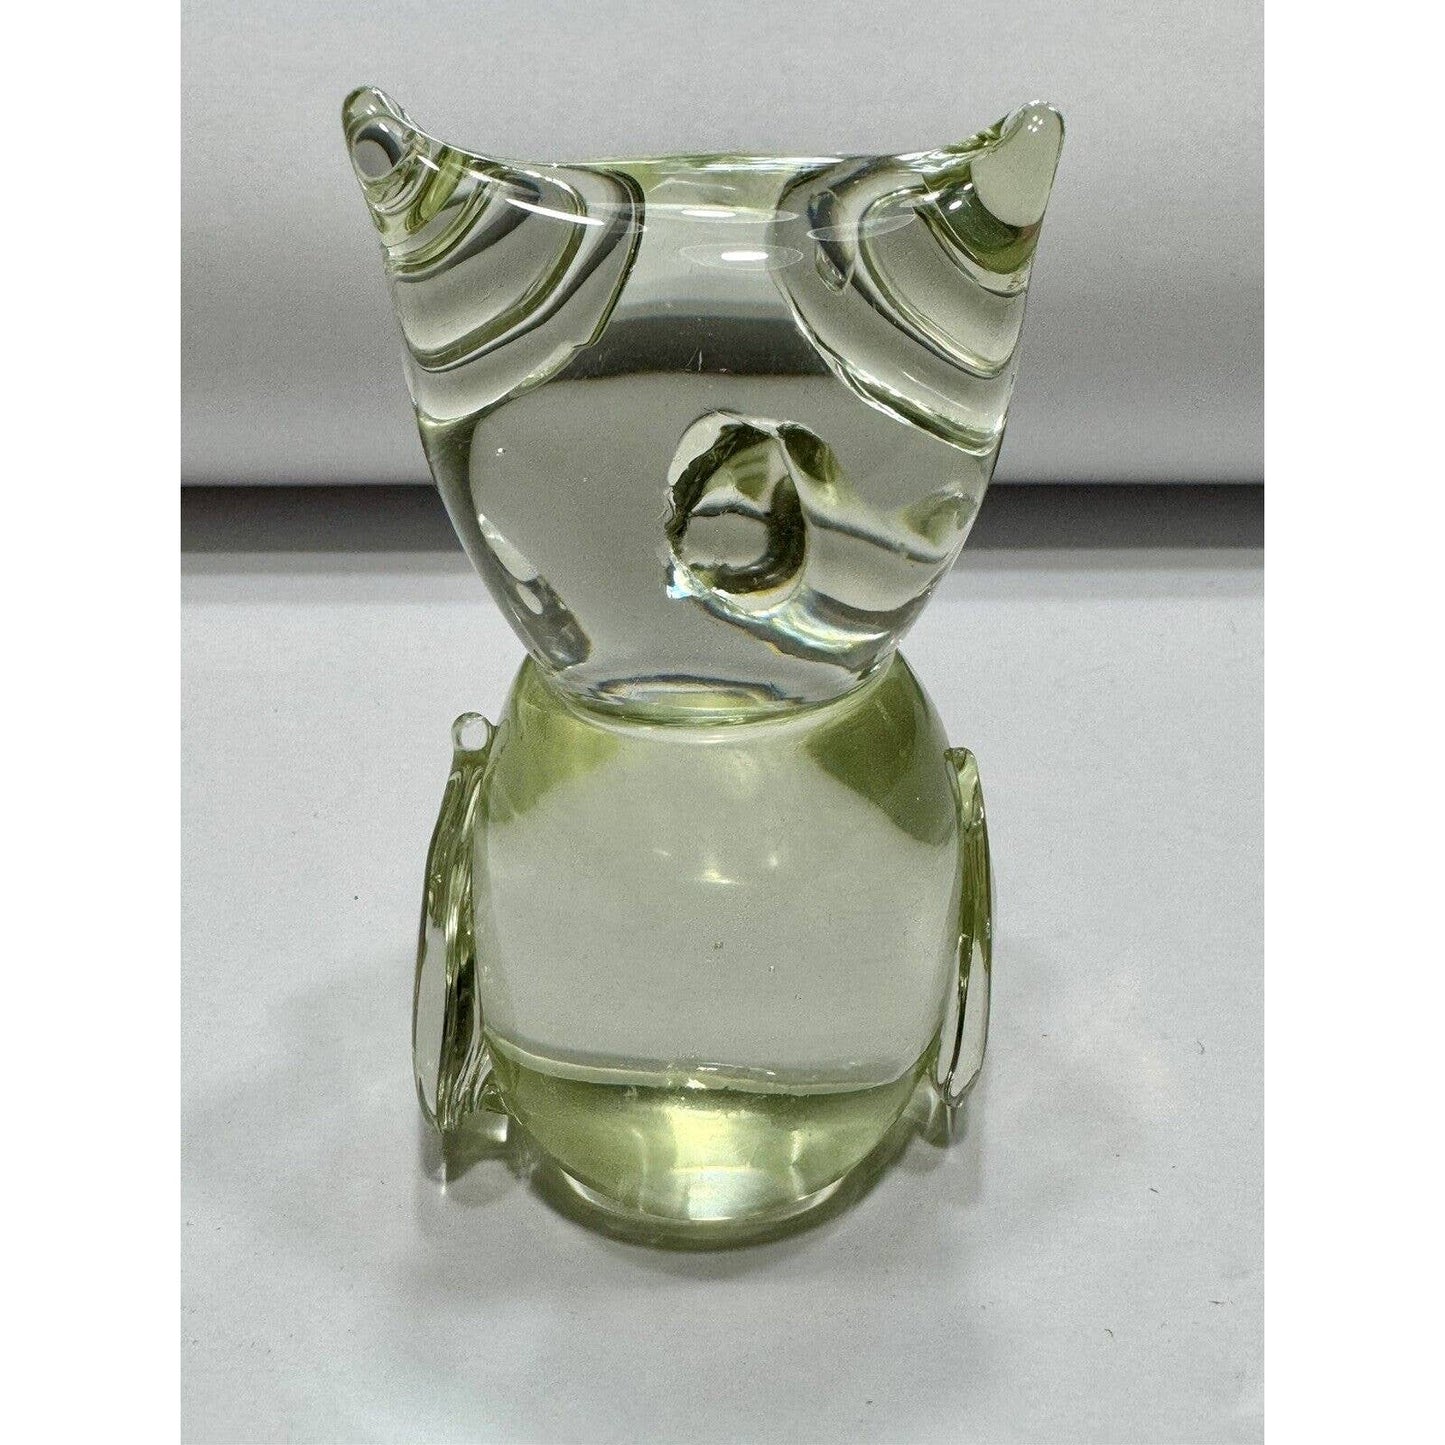 UnmarkedVintage Solid Art Glass MCM Green Tint 3.5”Owl Paperweight Unsigned - Black Dog Vintage